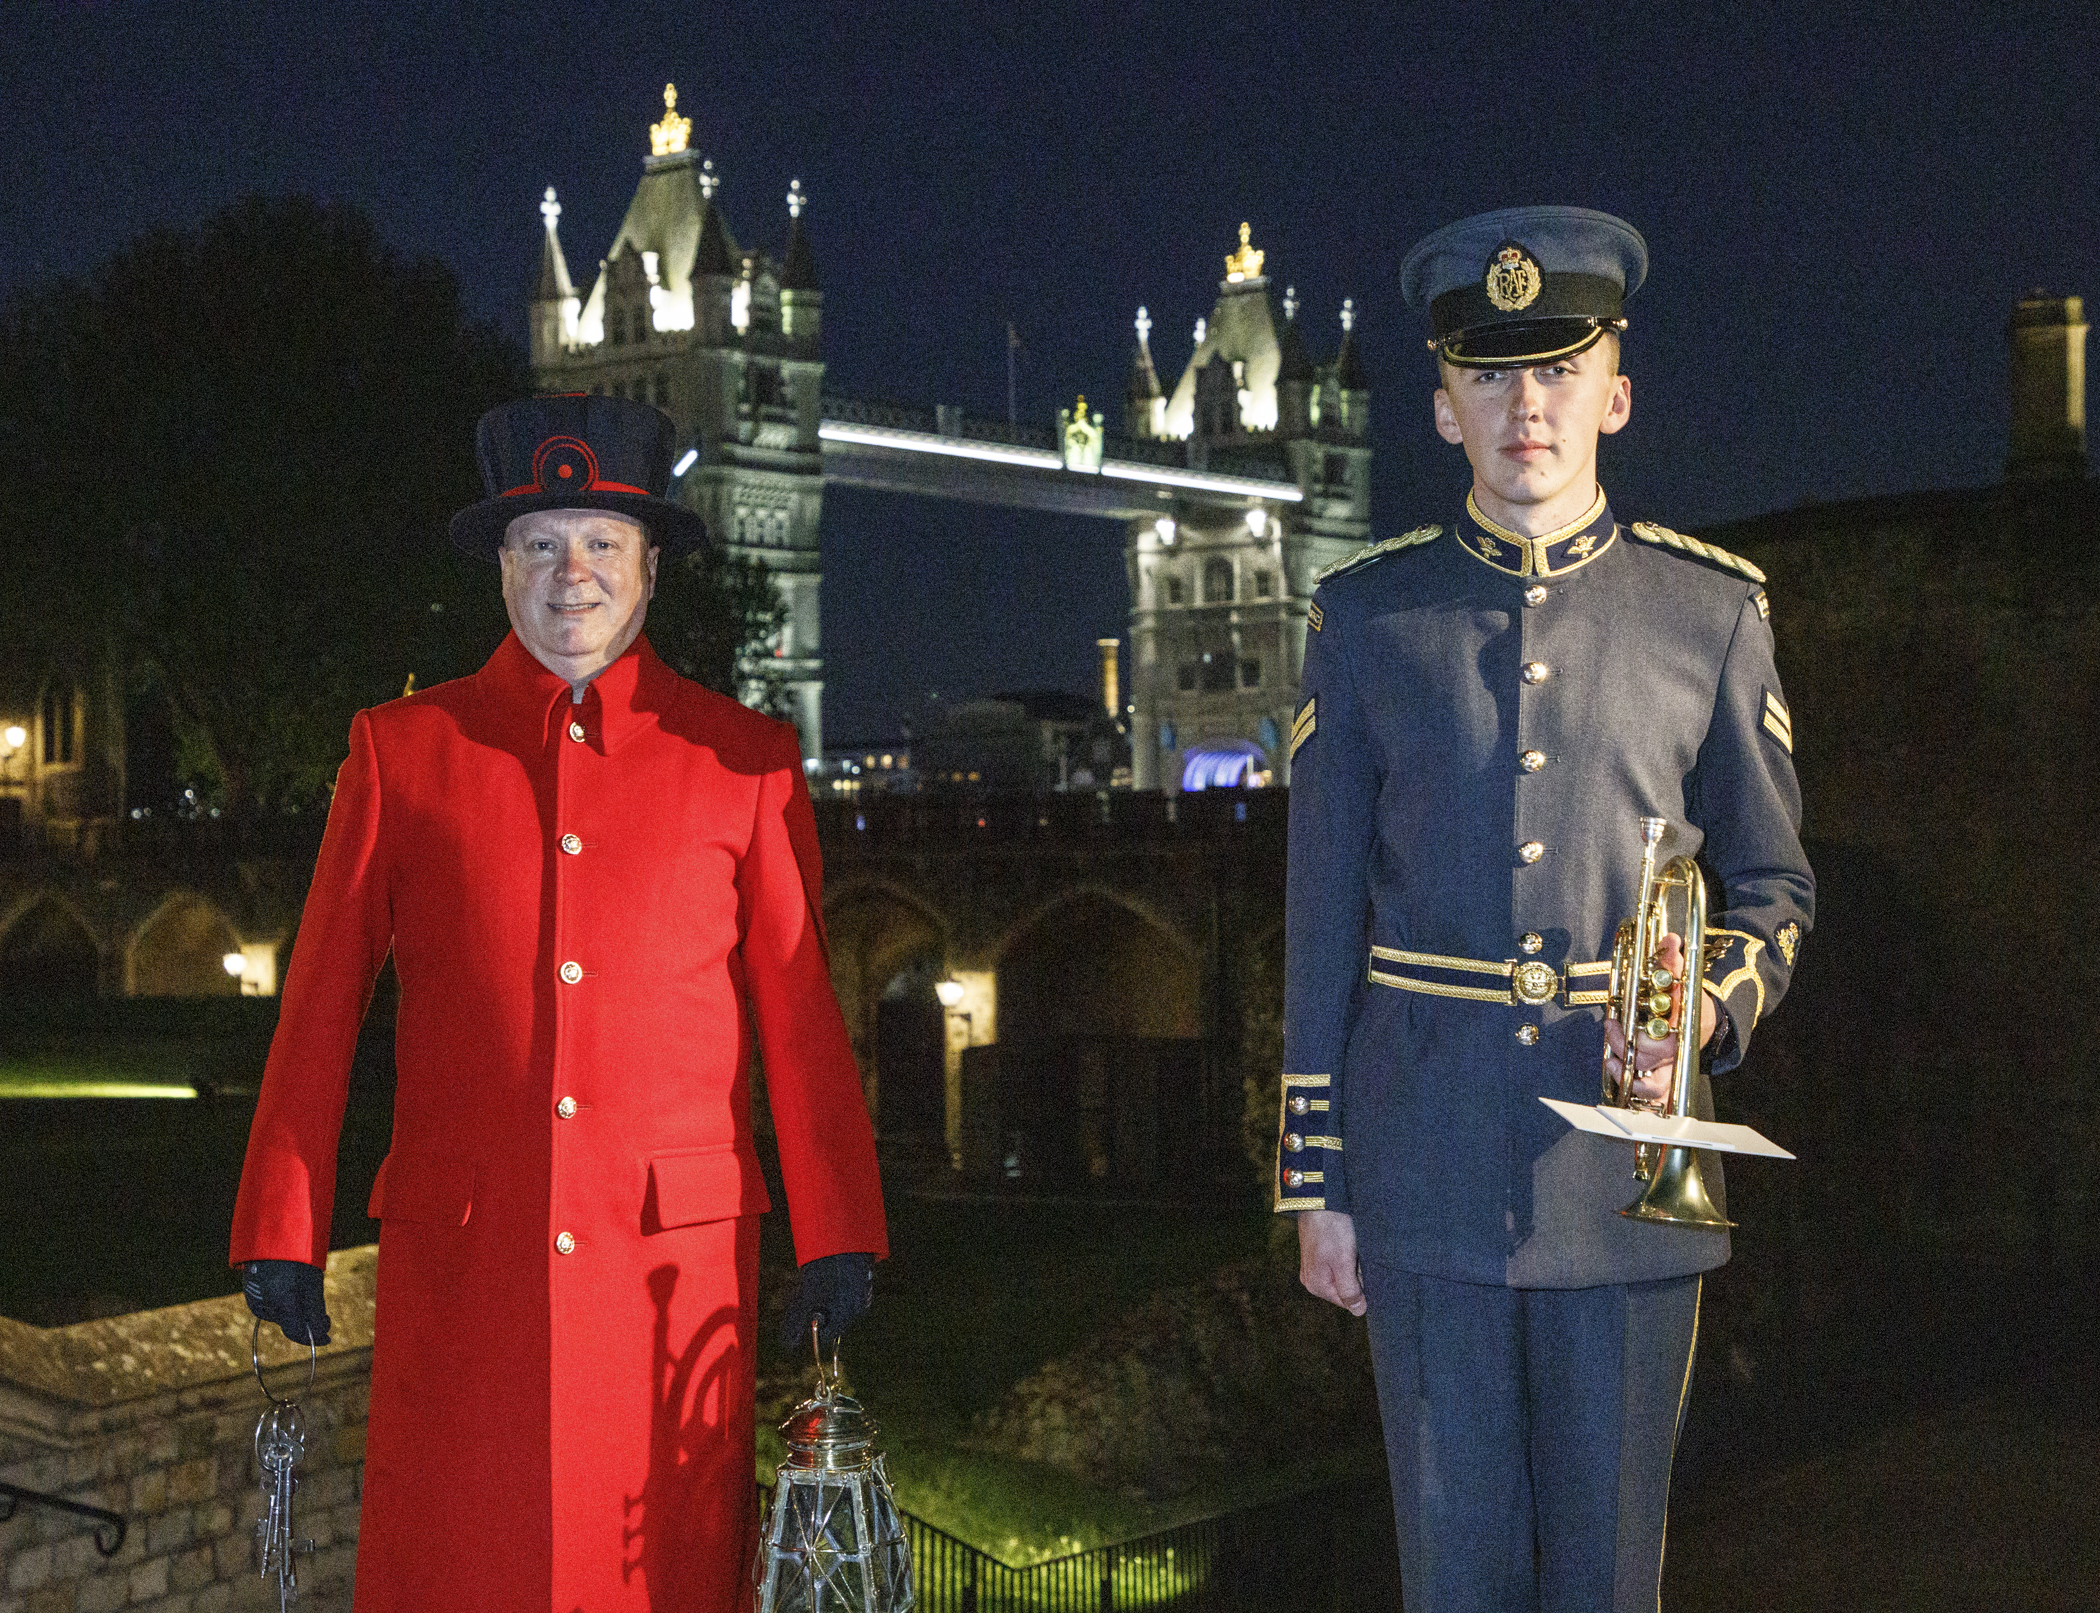 Yeoman Warder and RAF trumpeter stand by the Tower of London.